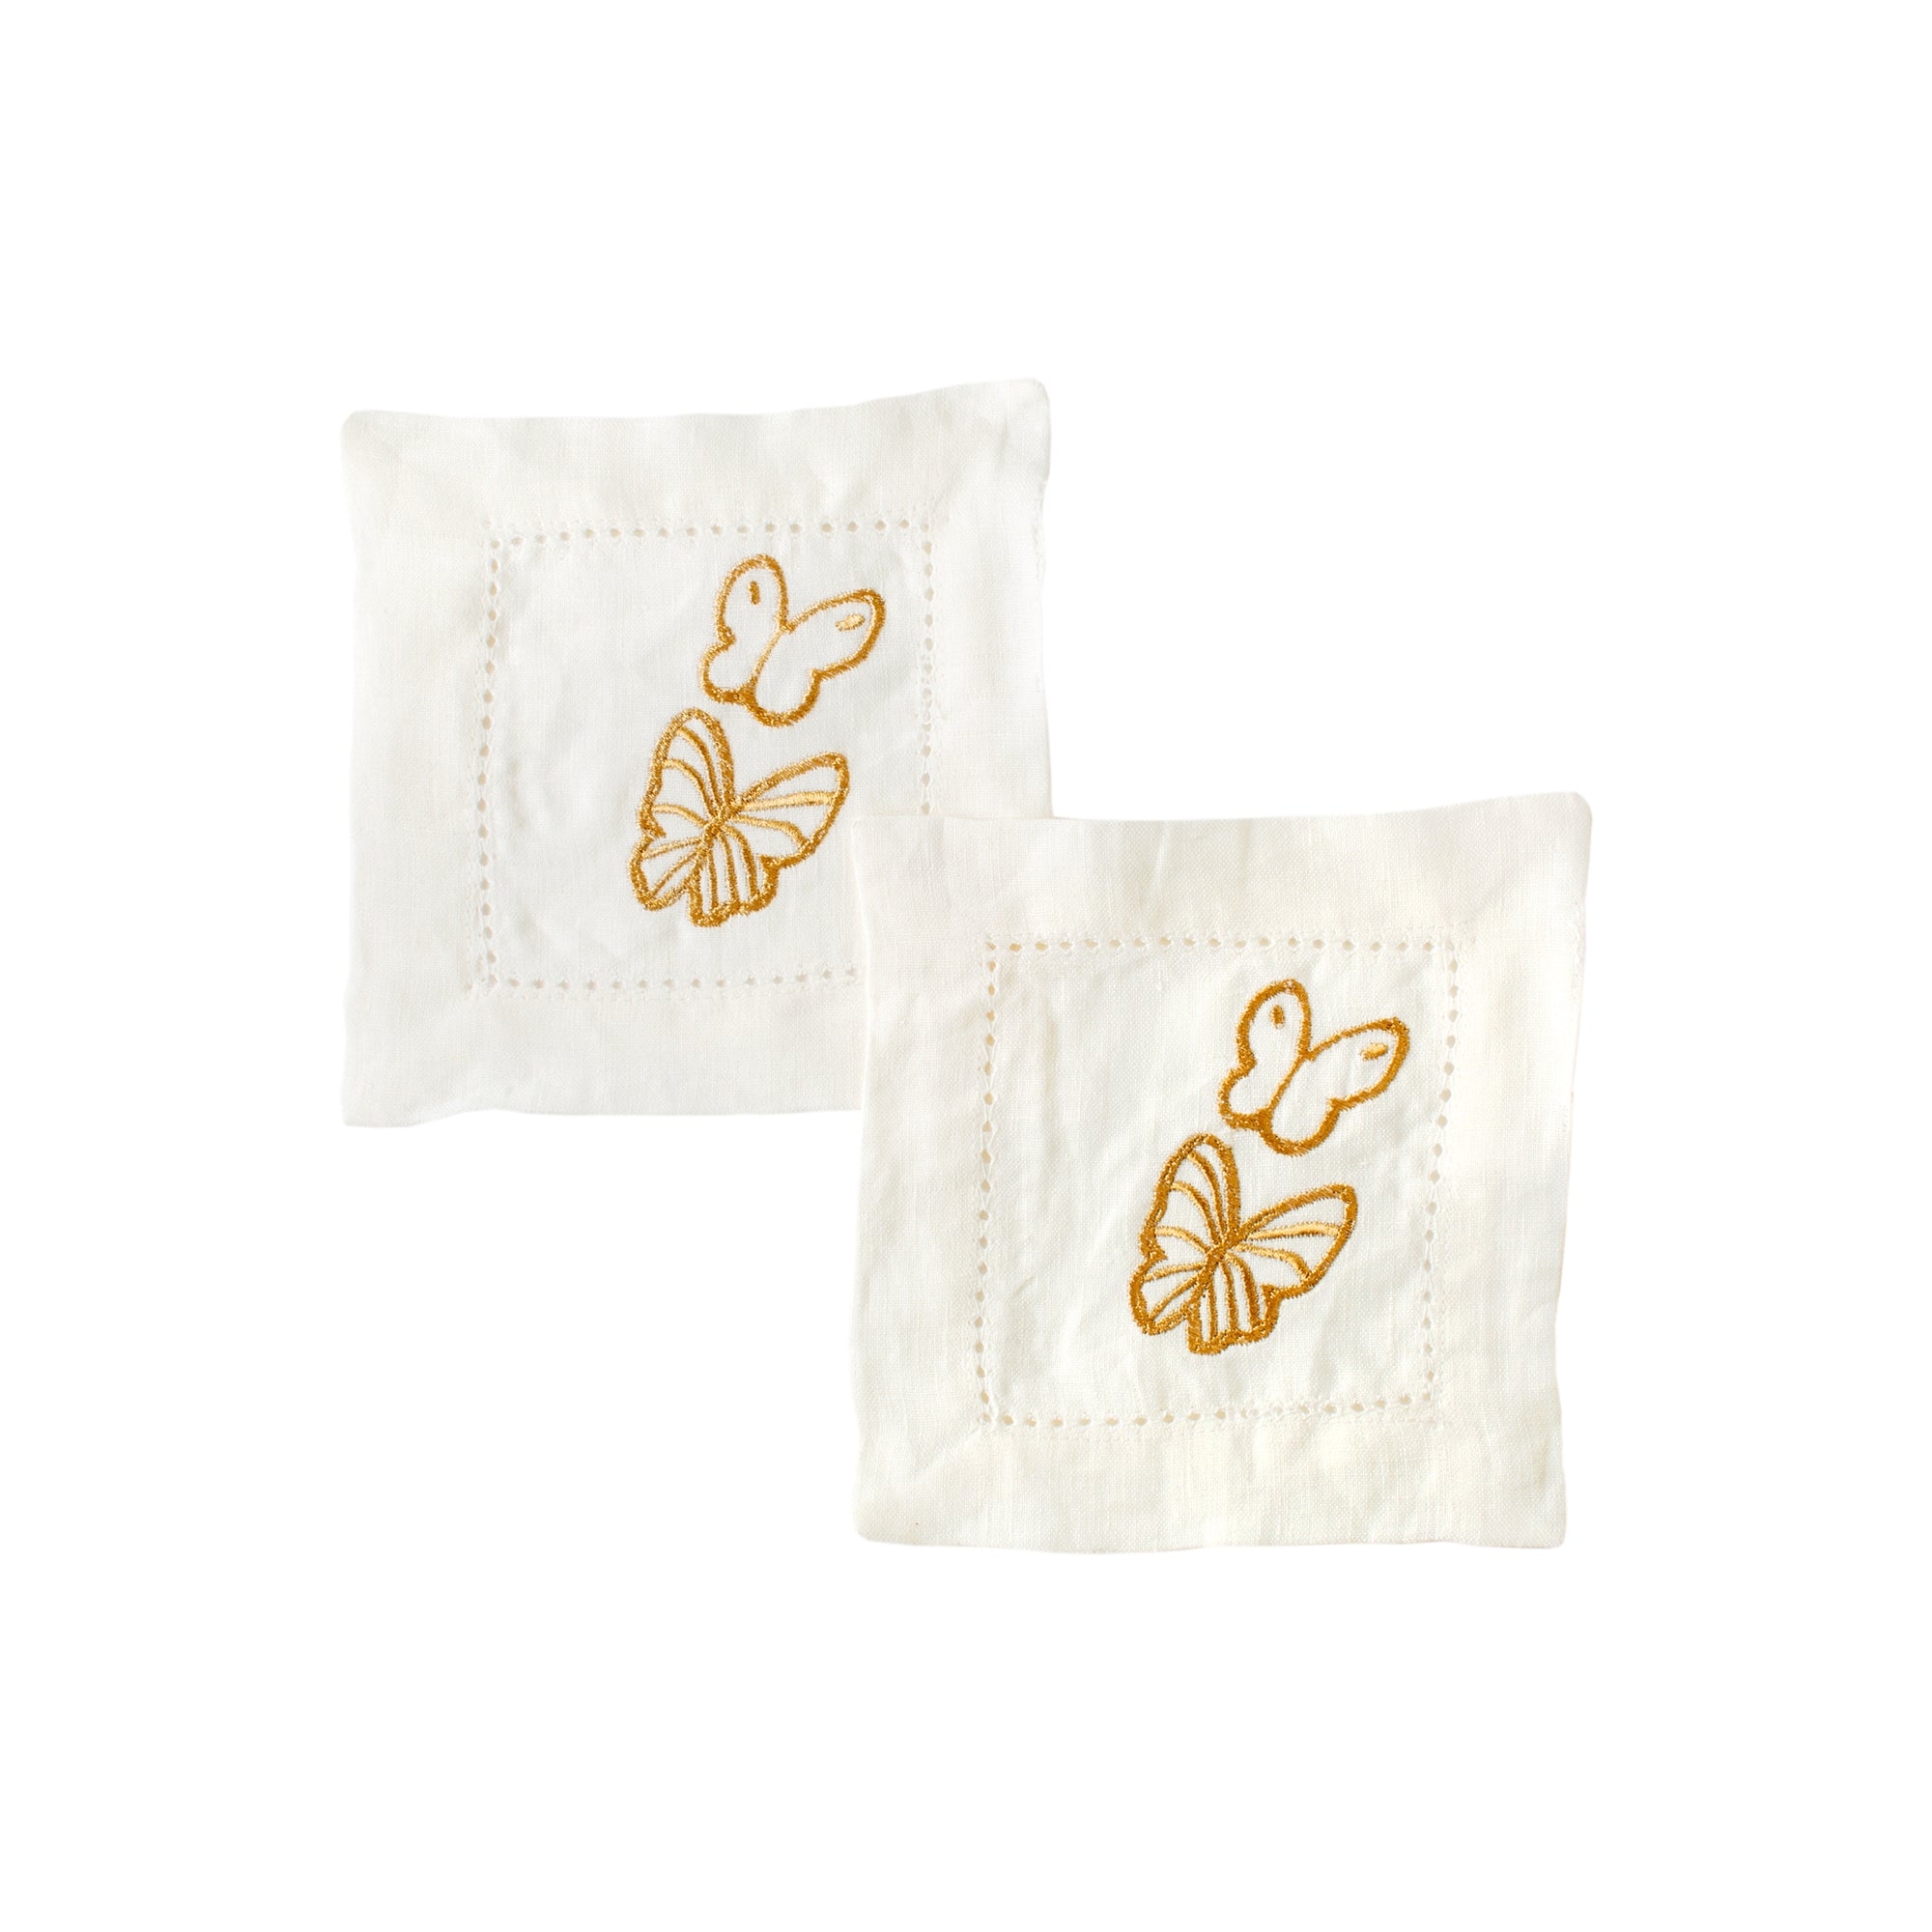 Gold Butterflies Embroidered Linen Cocktail Napkins in White, Set of 6 -  Hunt Slonem